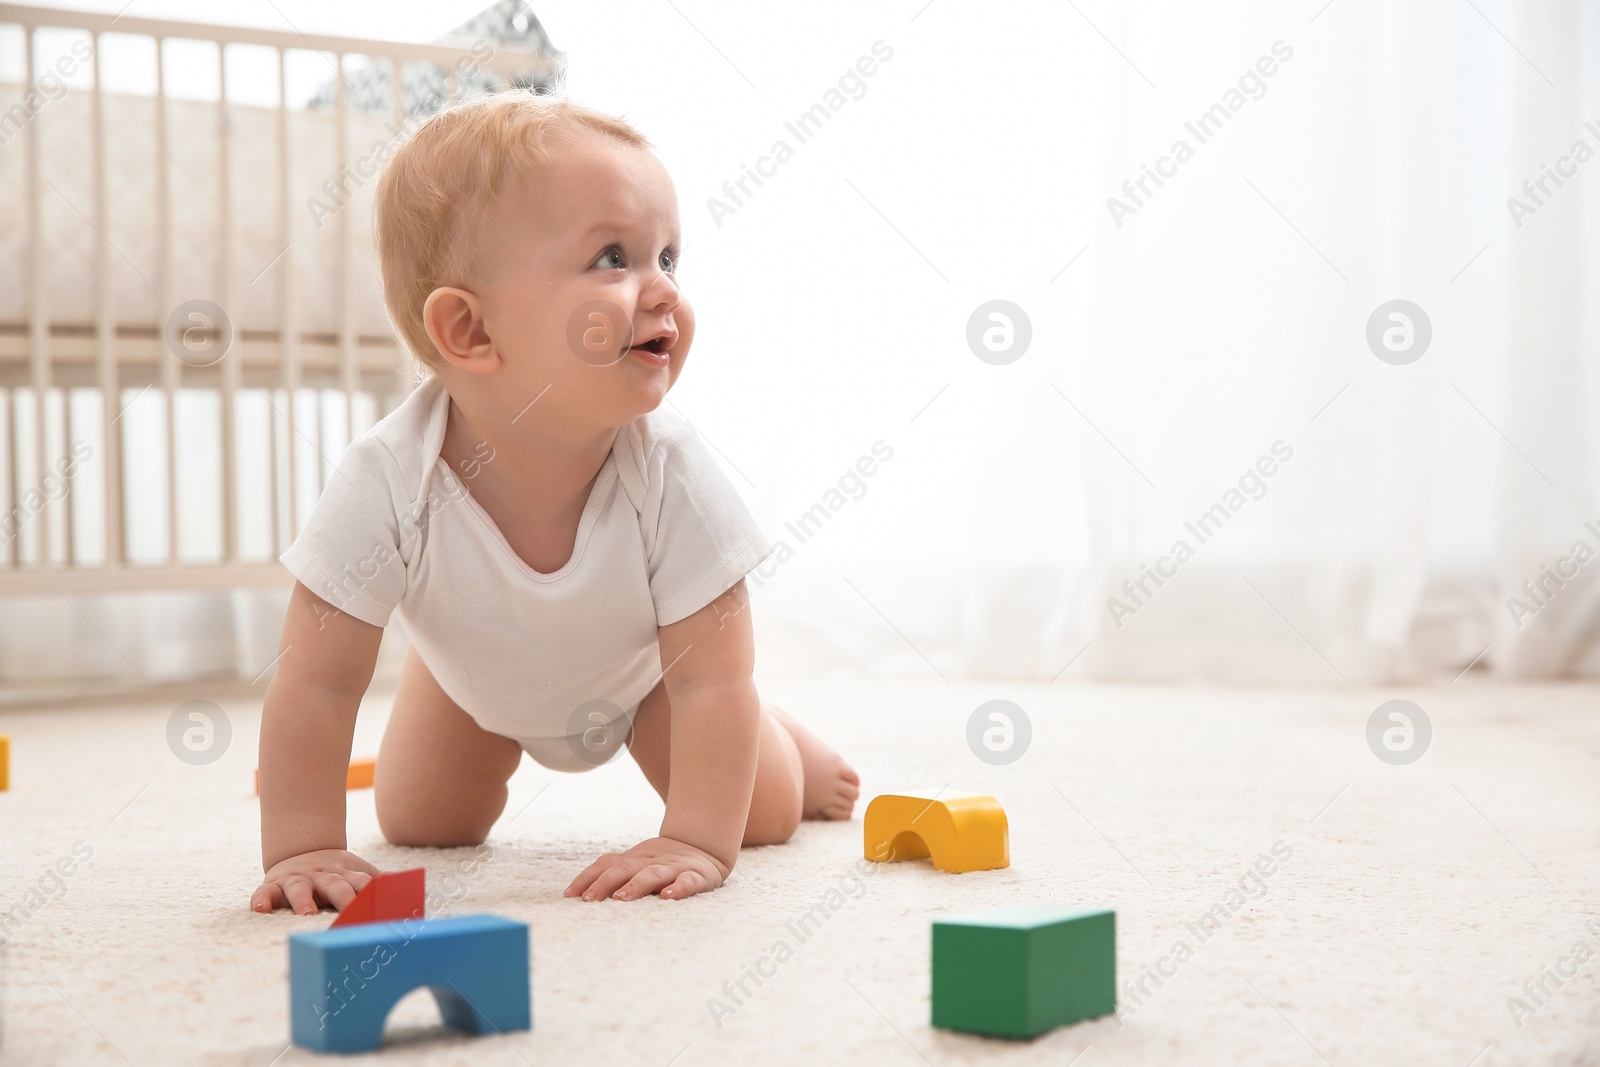 Photo of Cute little baby crawling on carpet indoors, space for text